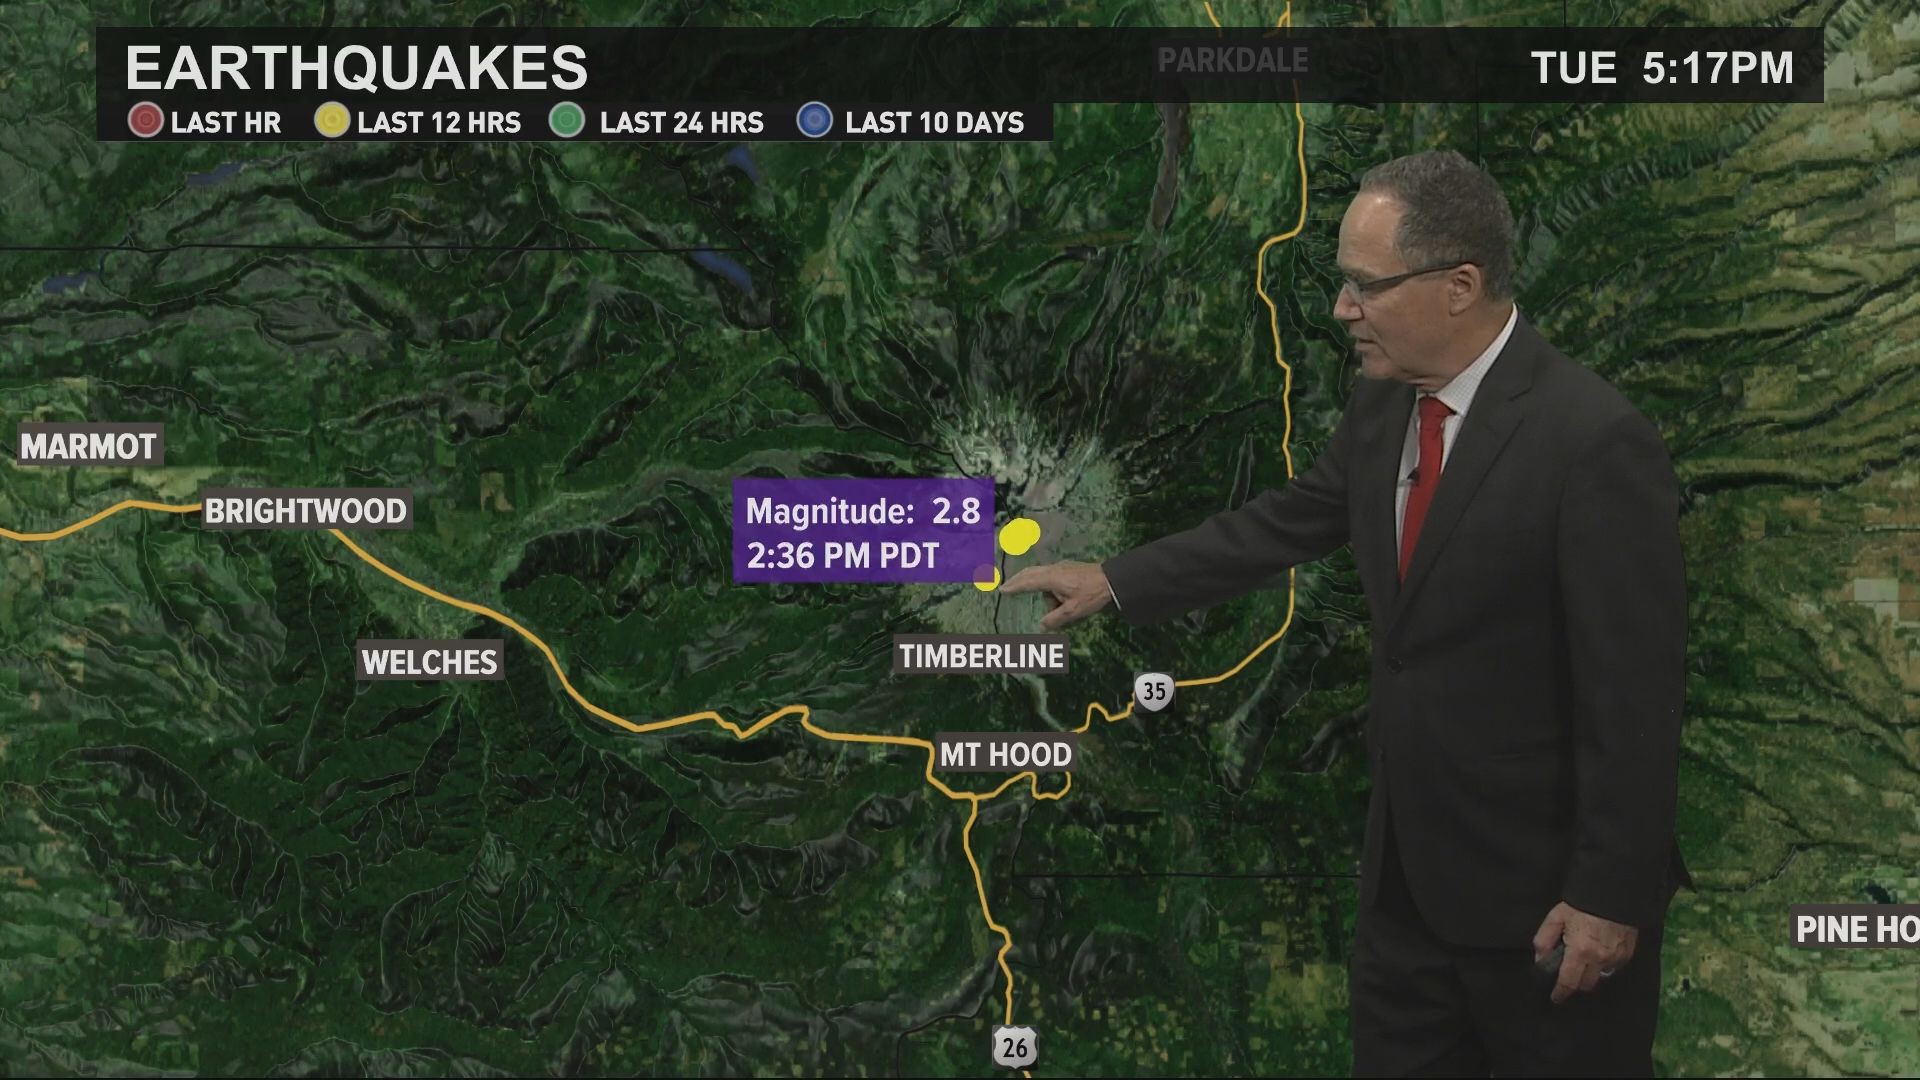 Two earthquakes struck at magnitudes between 2.6 and 3.0 near Mount Hood Tuesday afternoon.